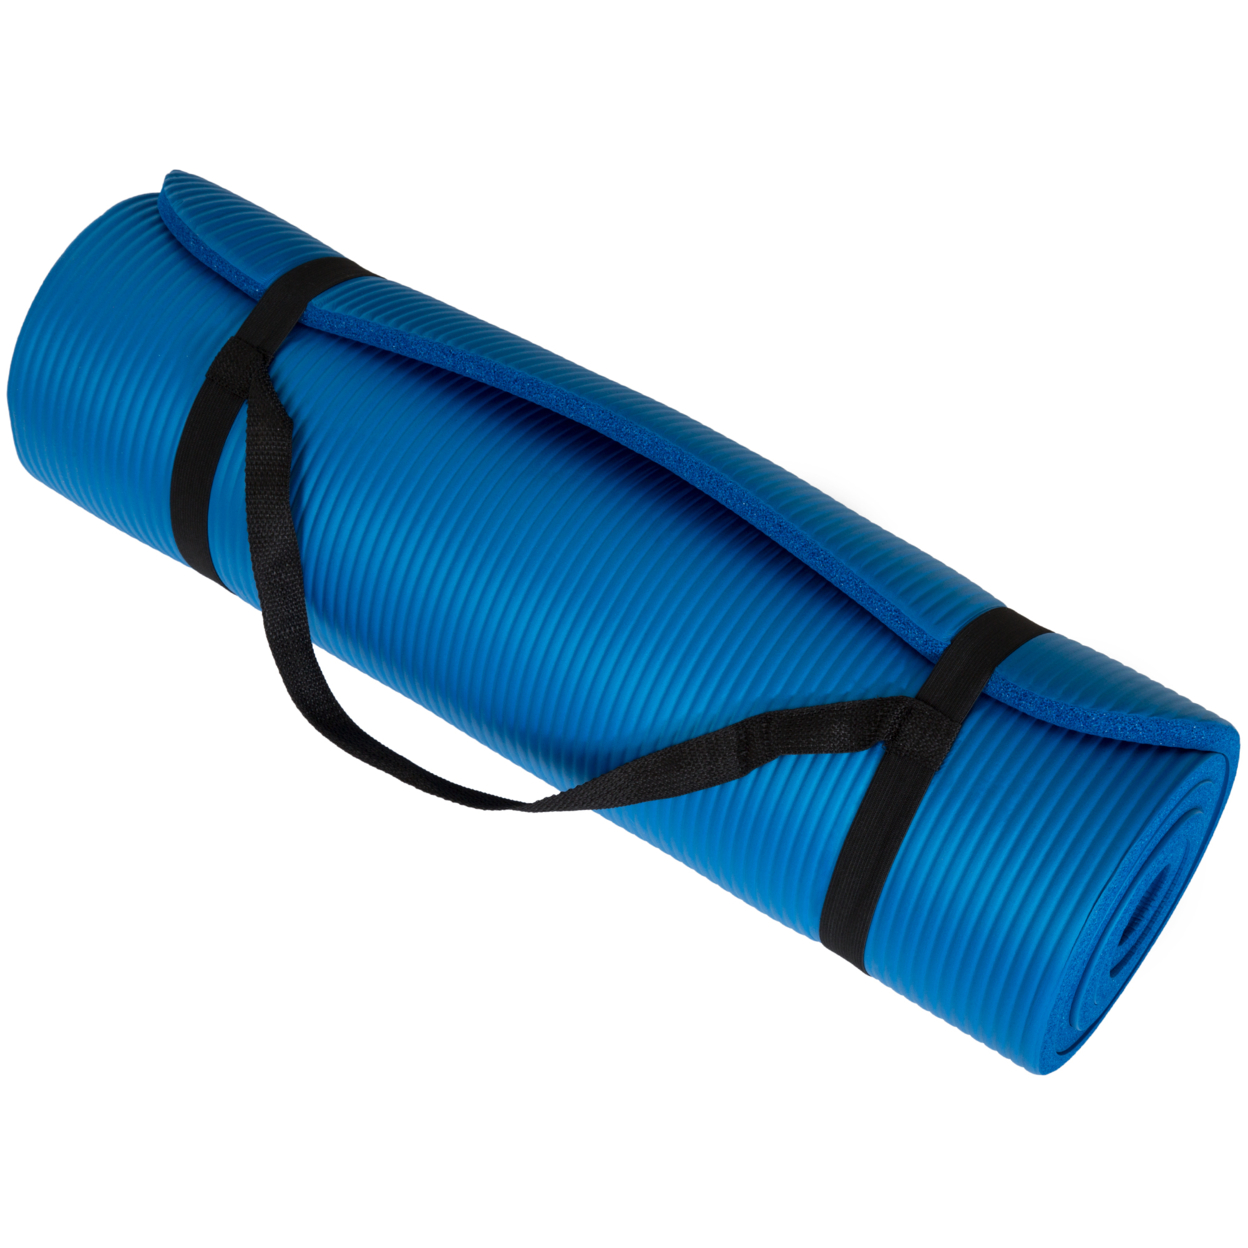 Wakeman Fitness Extra Thick Yoga Exercise Mat 71 X 24 X 0.5